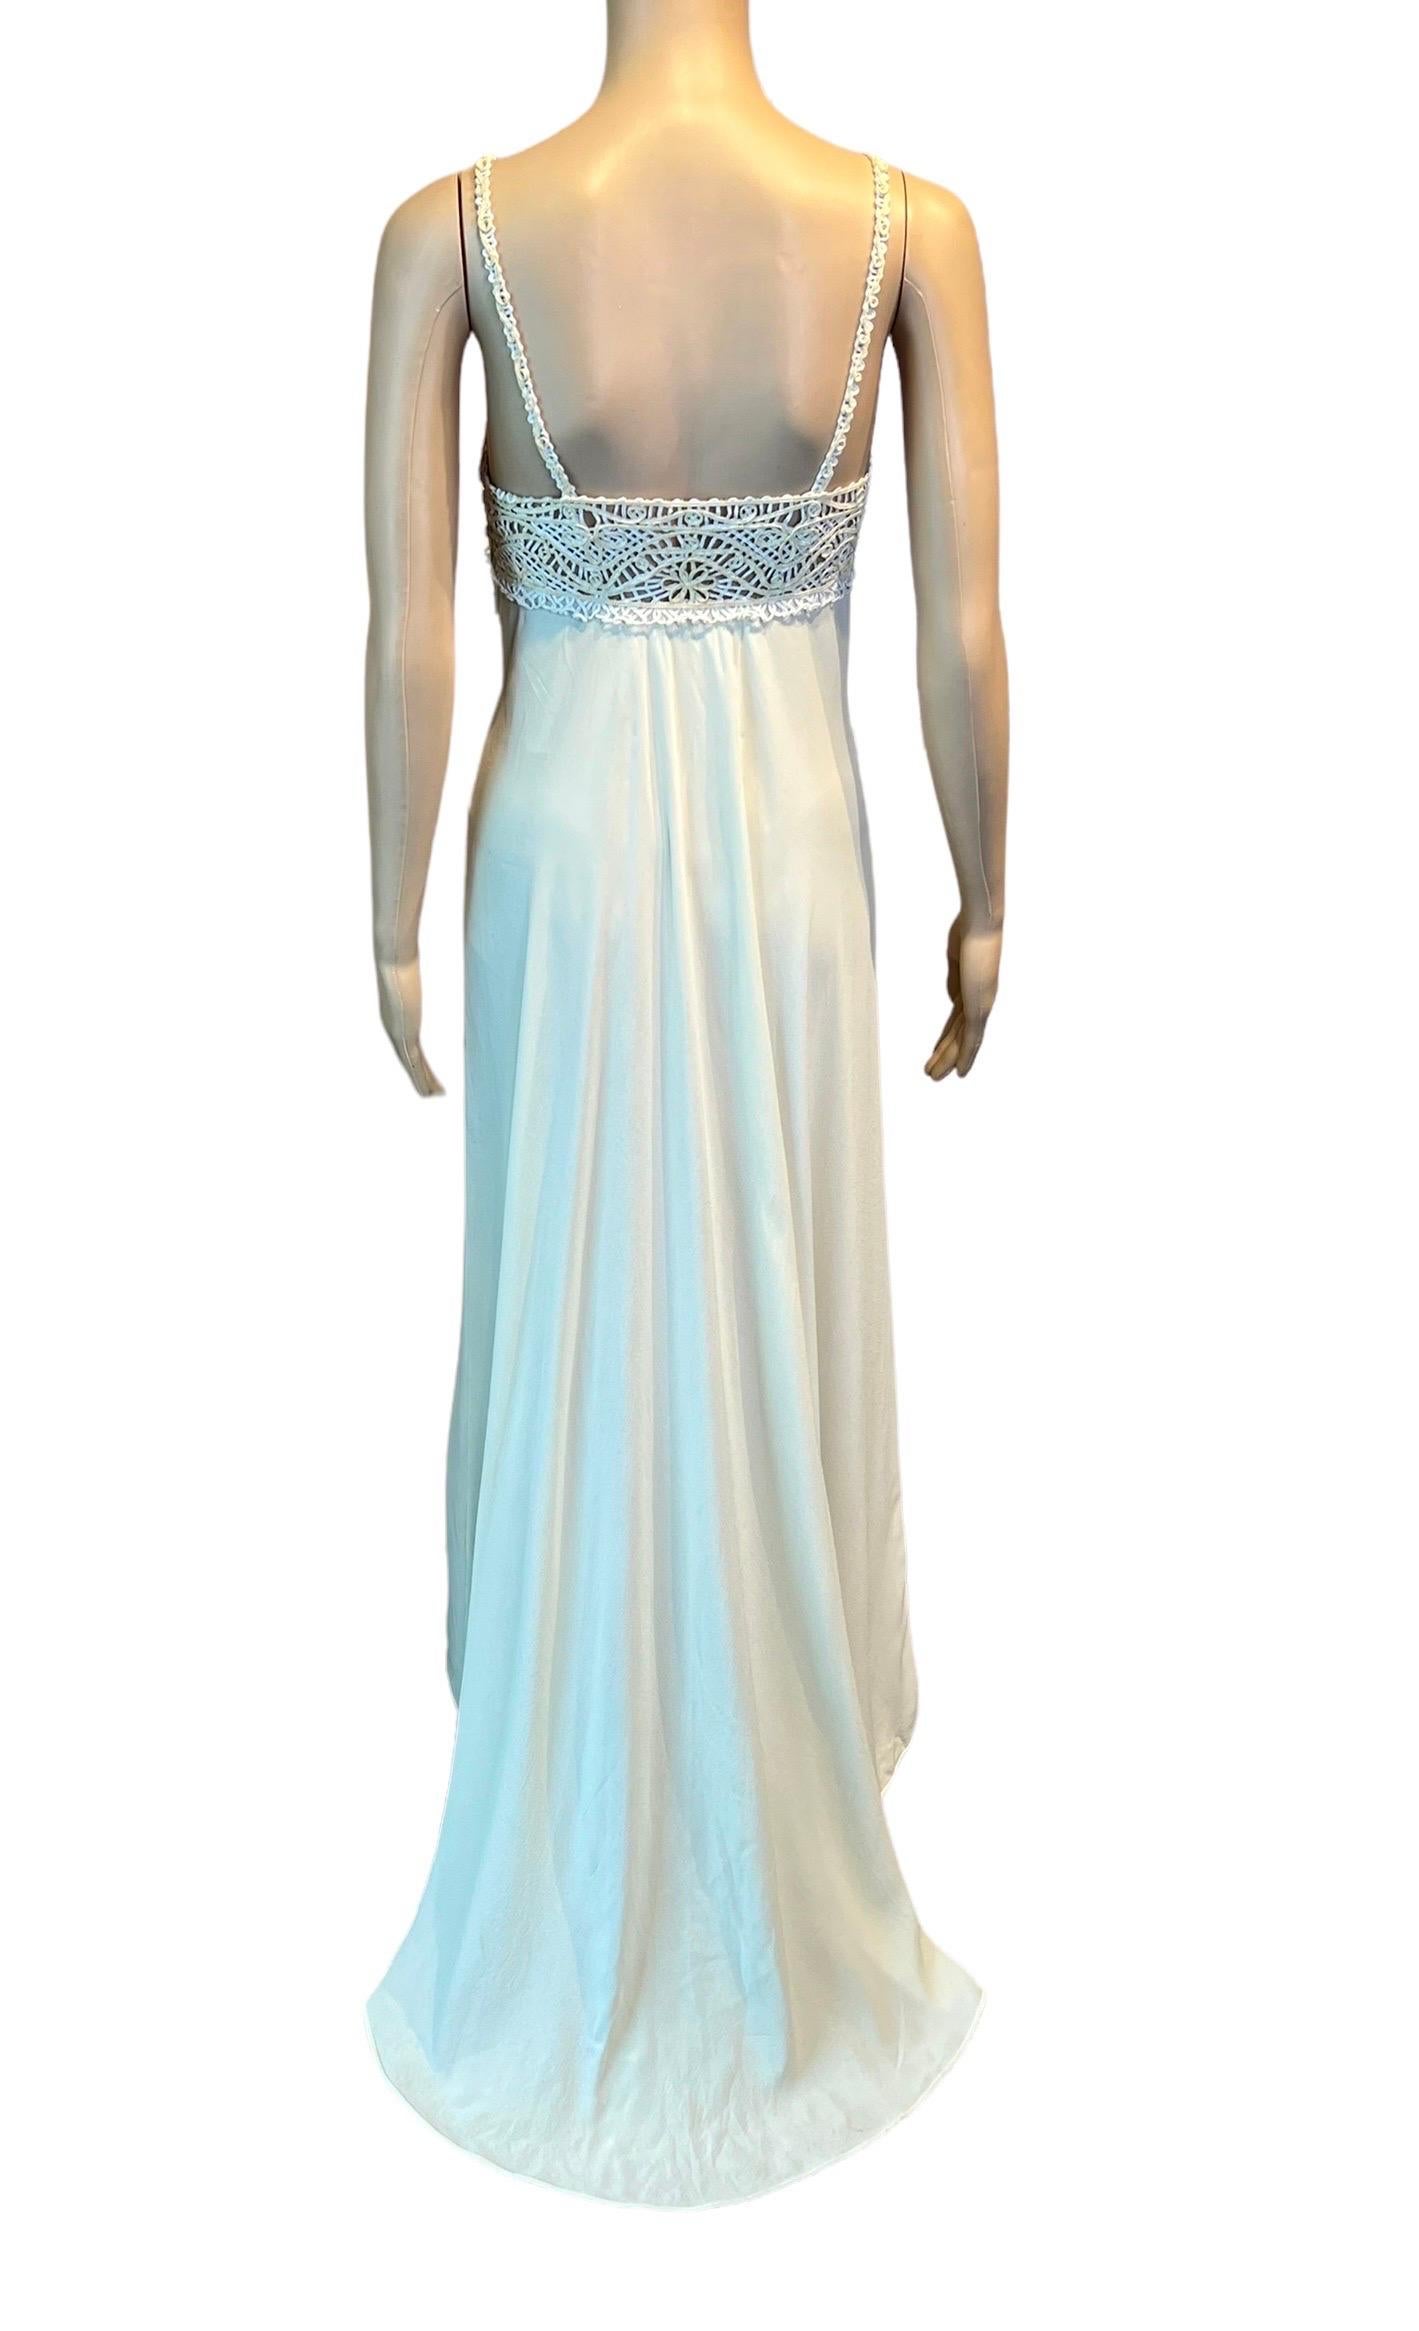 Gianni Versace S/S 1997 Runway Embroidered Lace Ivory Evening Dress Gown  For Sale 2